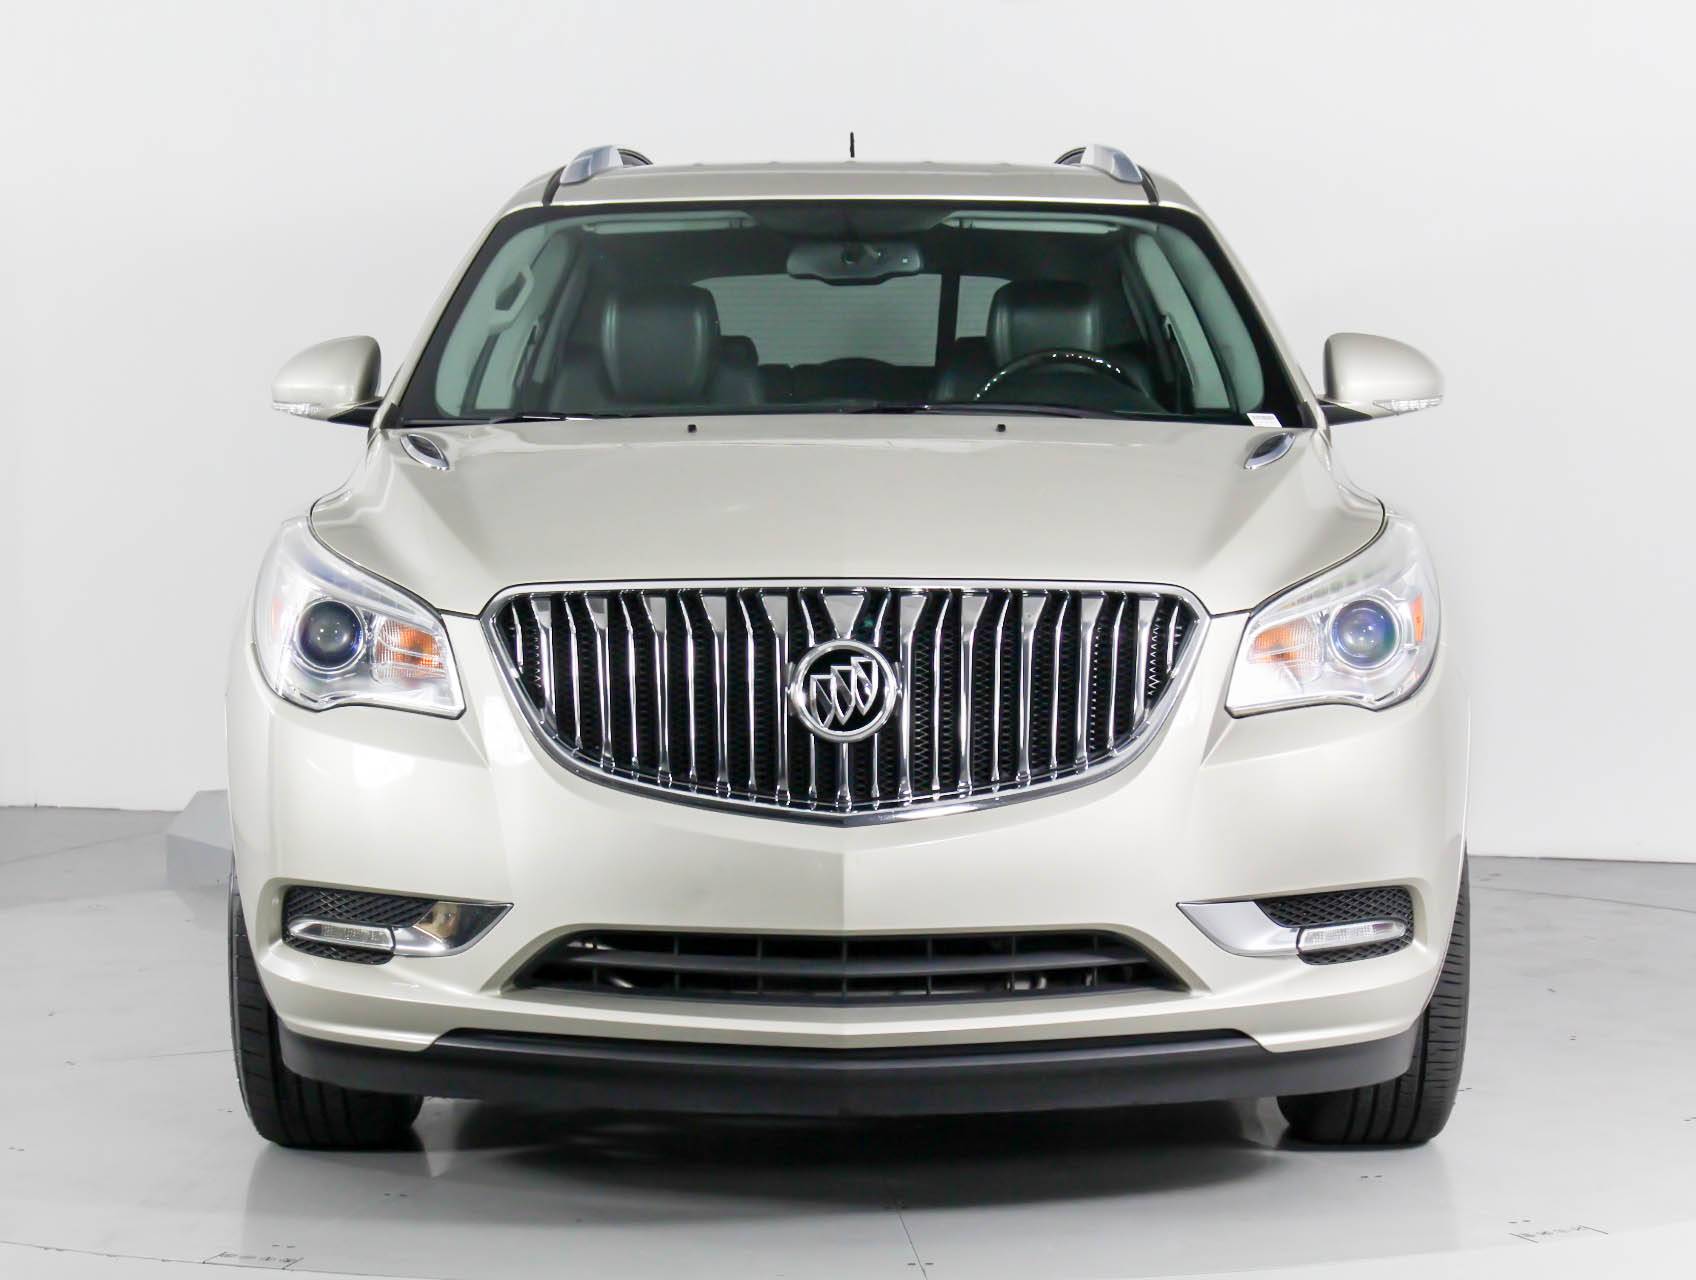 Florida Fine Cars - Used BUICK ENCLAVE 2013 WEST PALM LEATHER